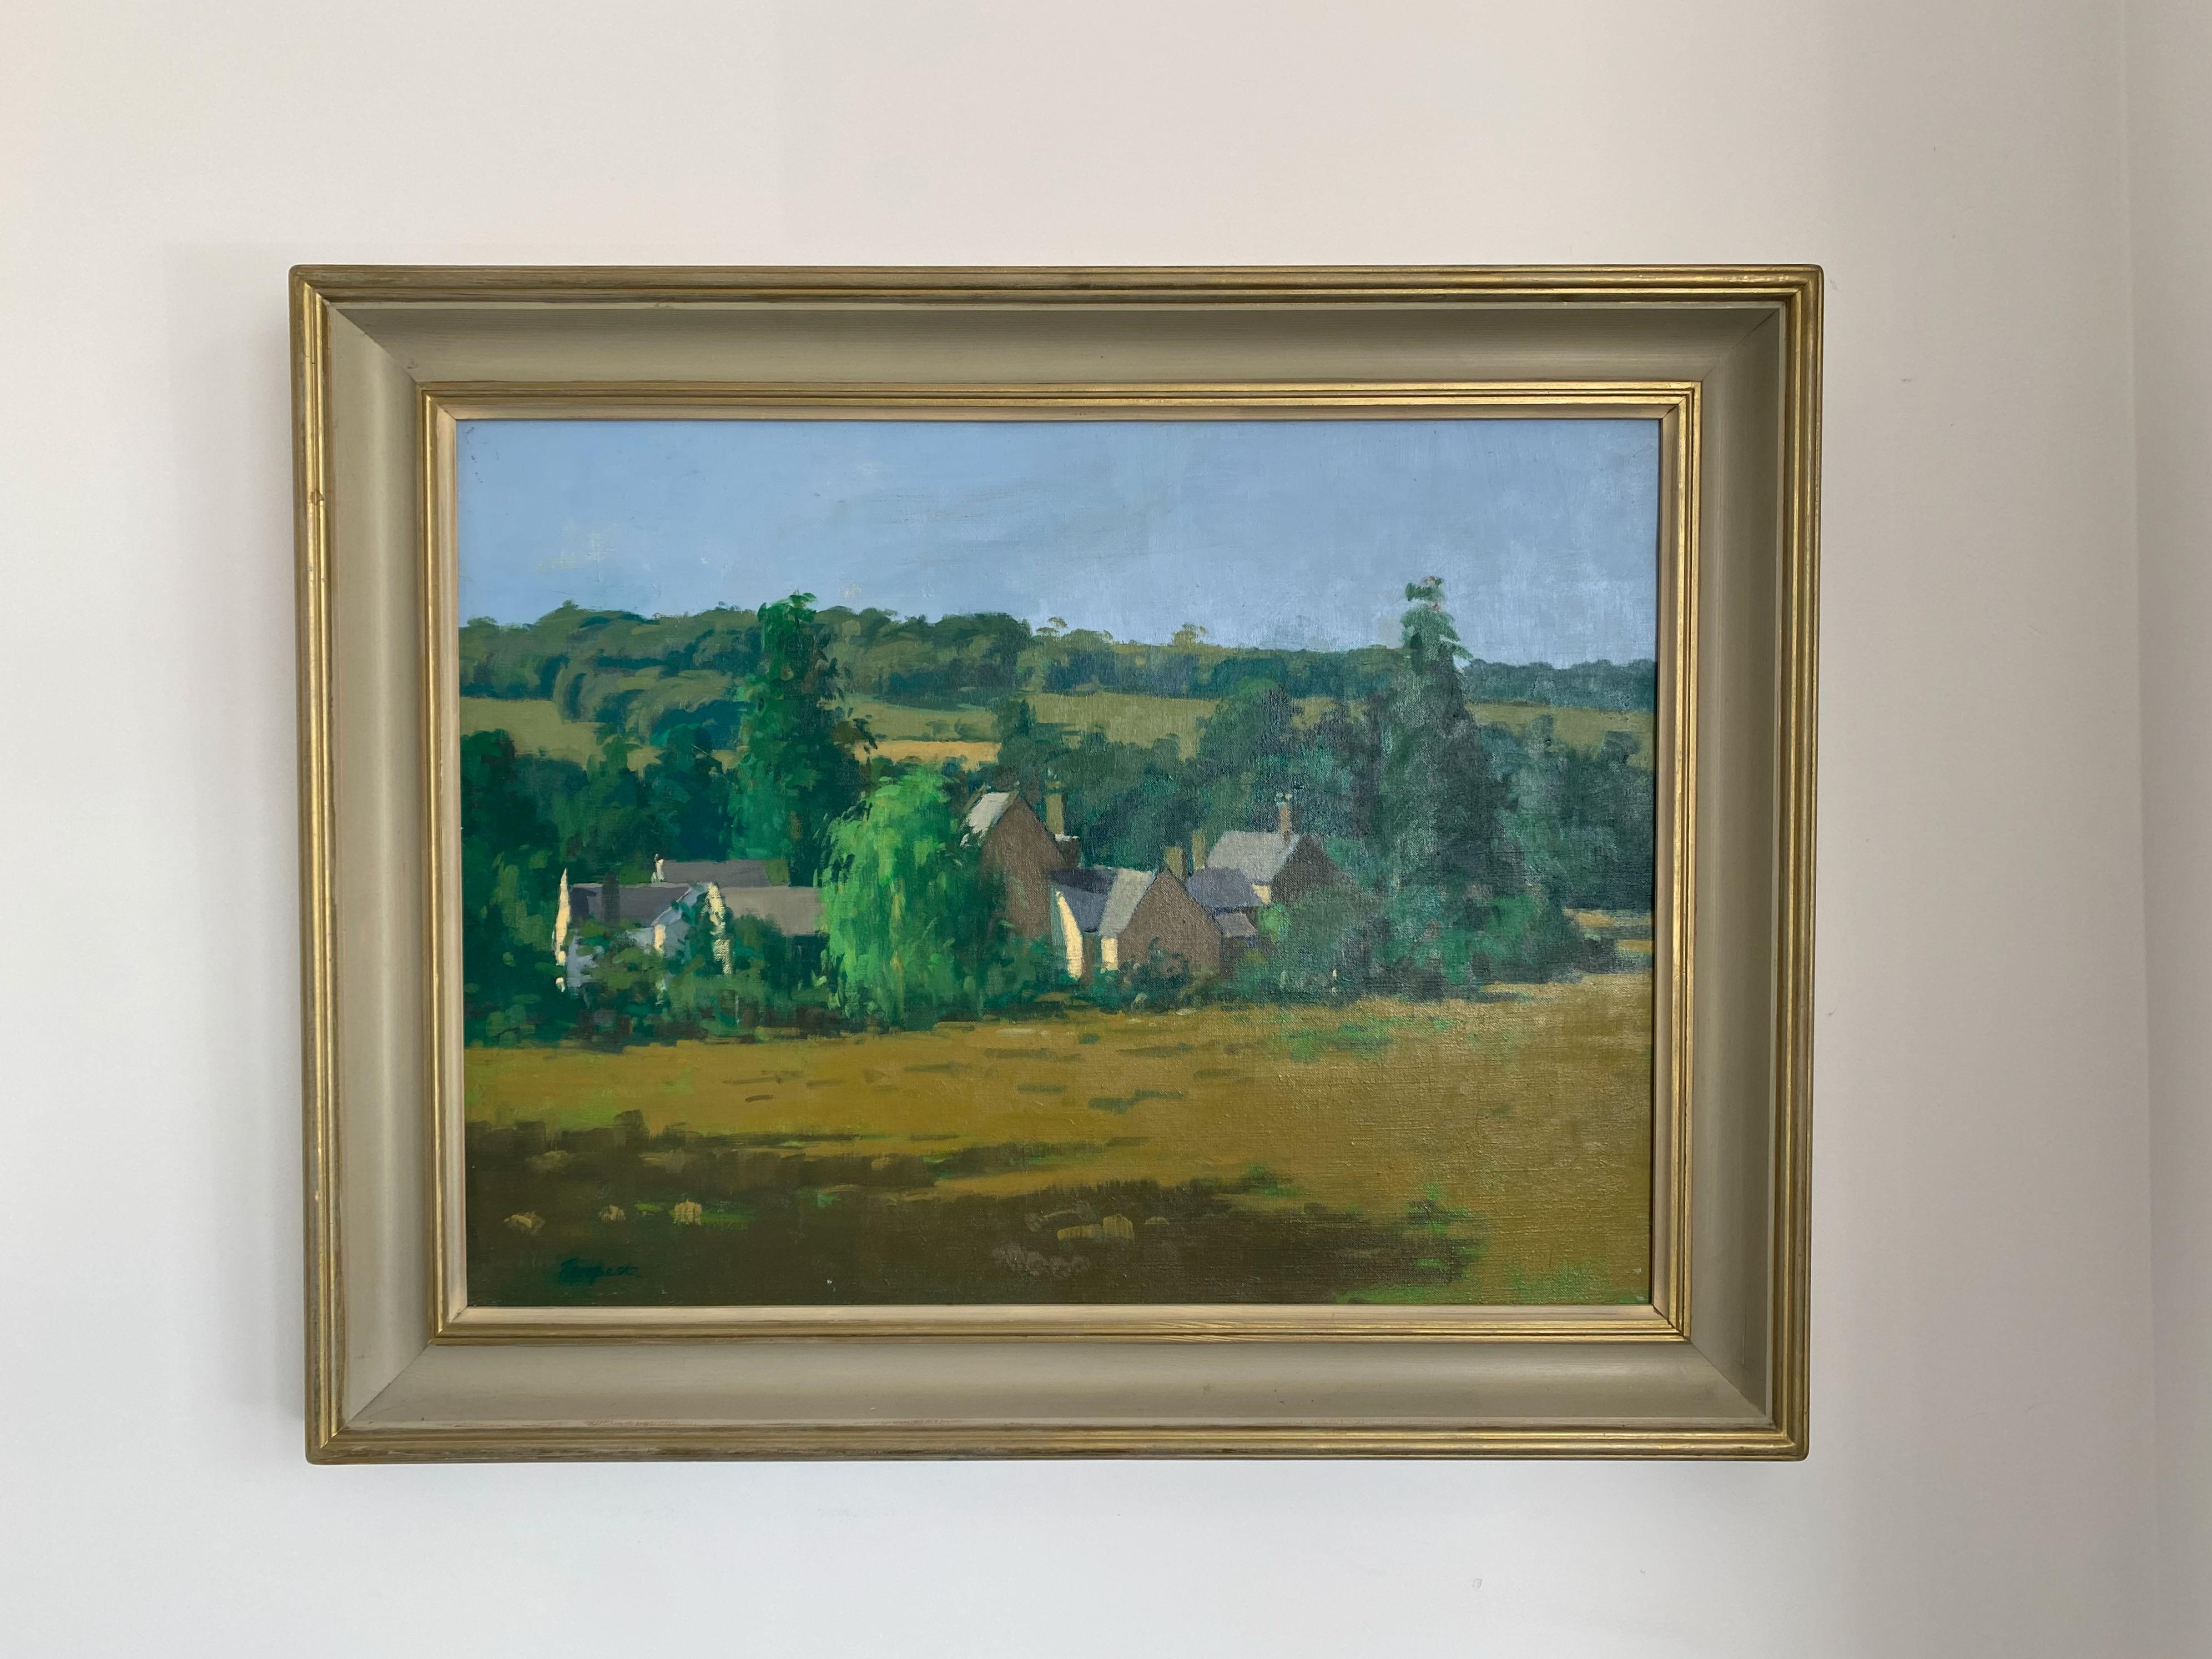 Oil painting

By Victor Tempest

On Canvas

Framed

Dimensions are of frame

Mid/late 20th Century